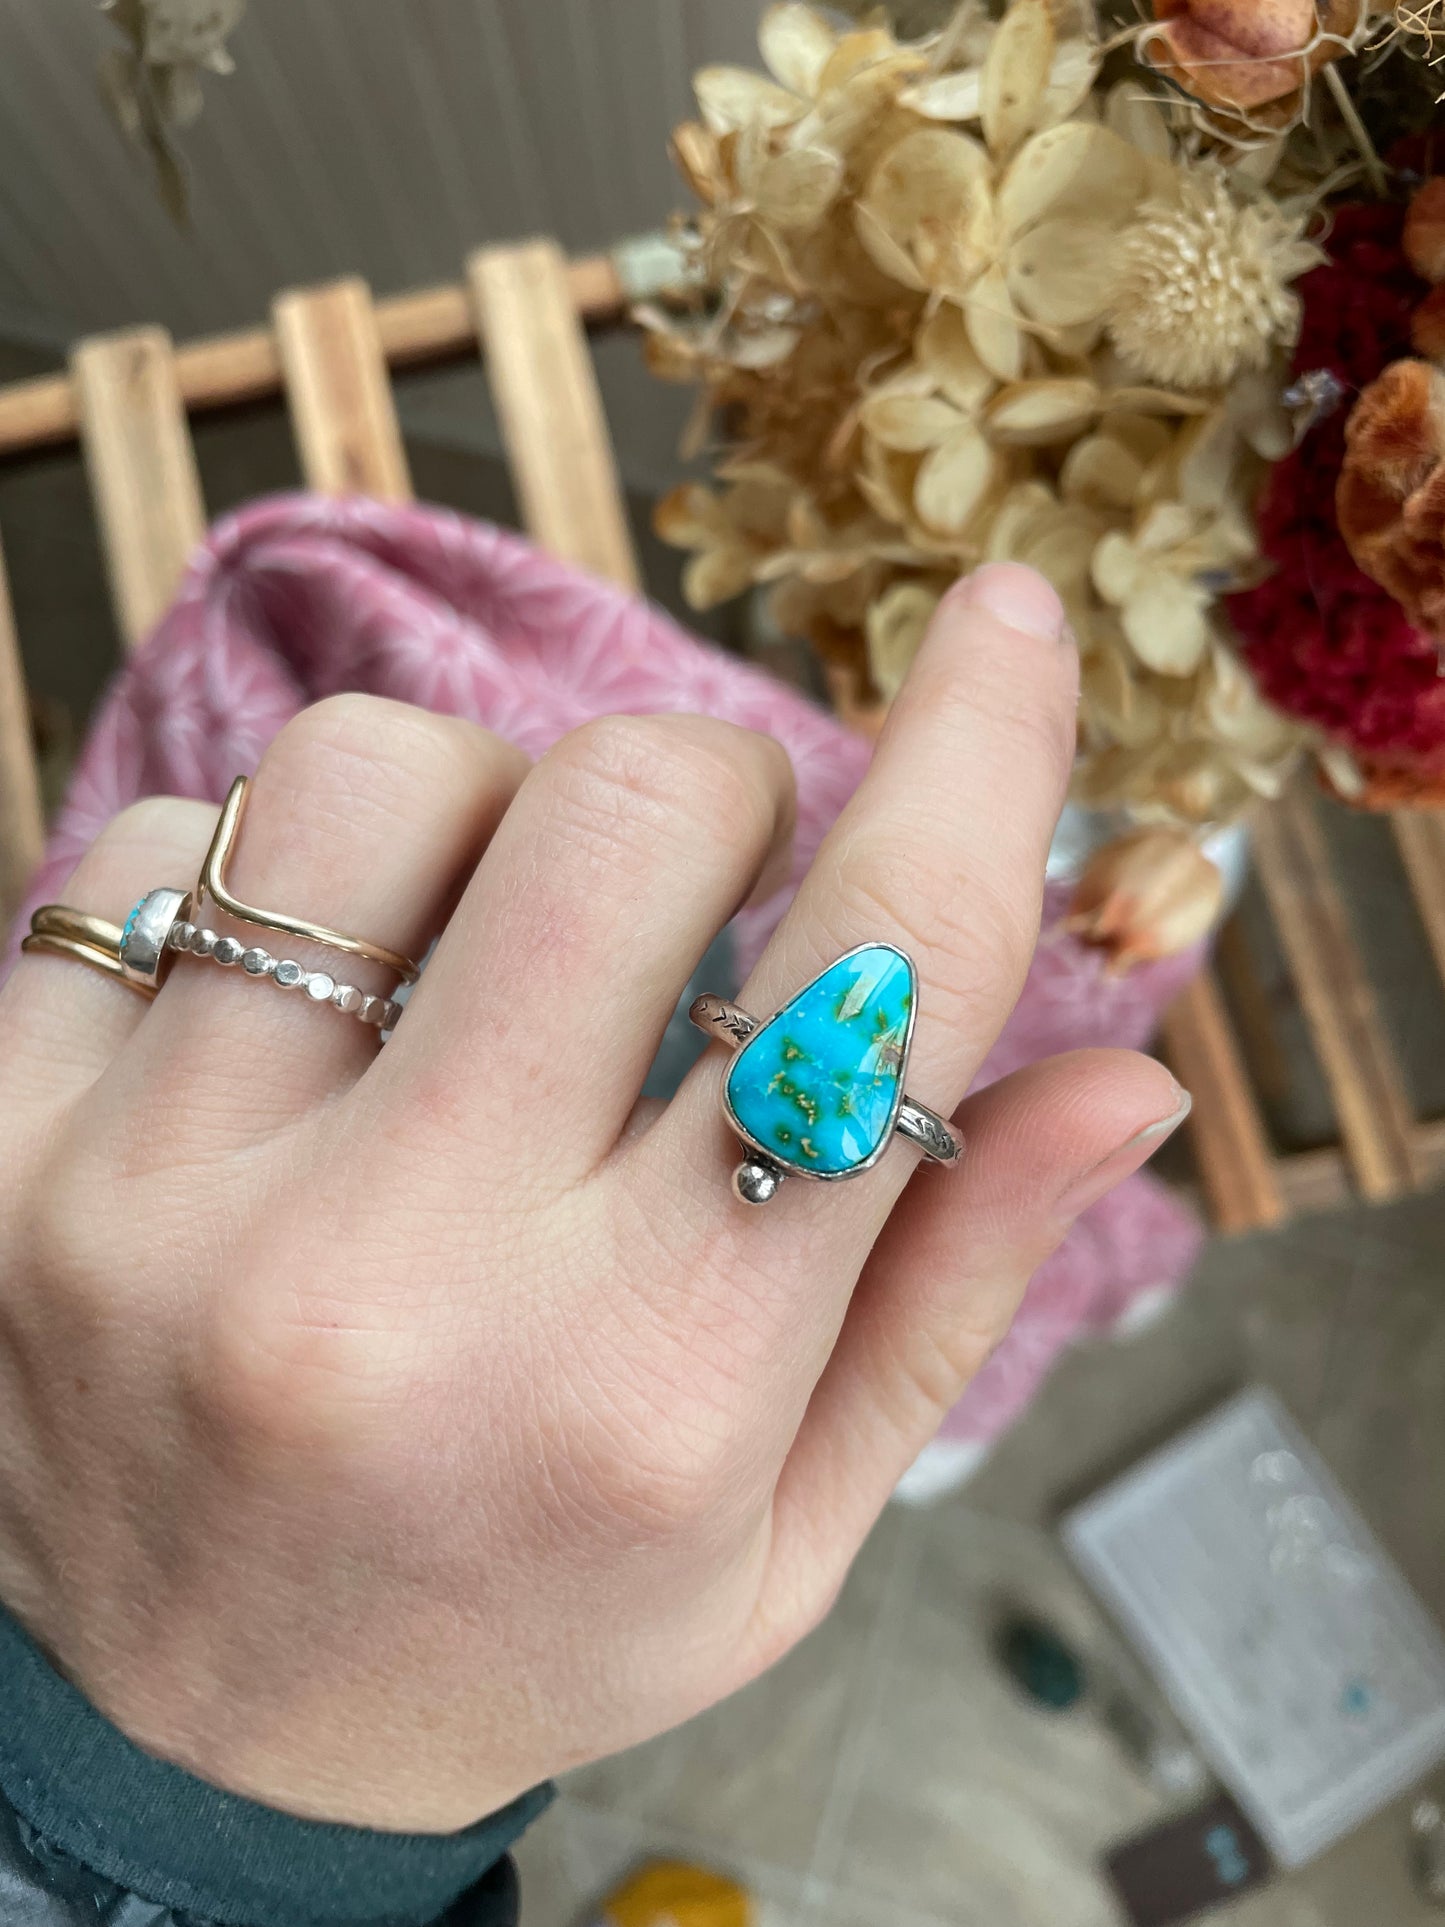 Sonoran Mountain Turquoise Ring - size 9 1/2